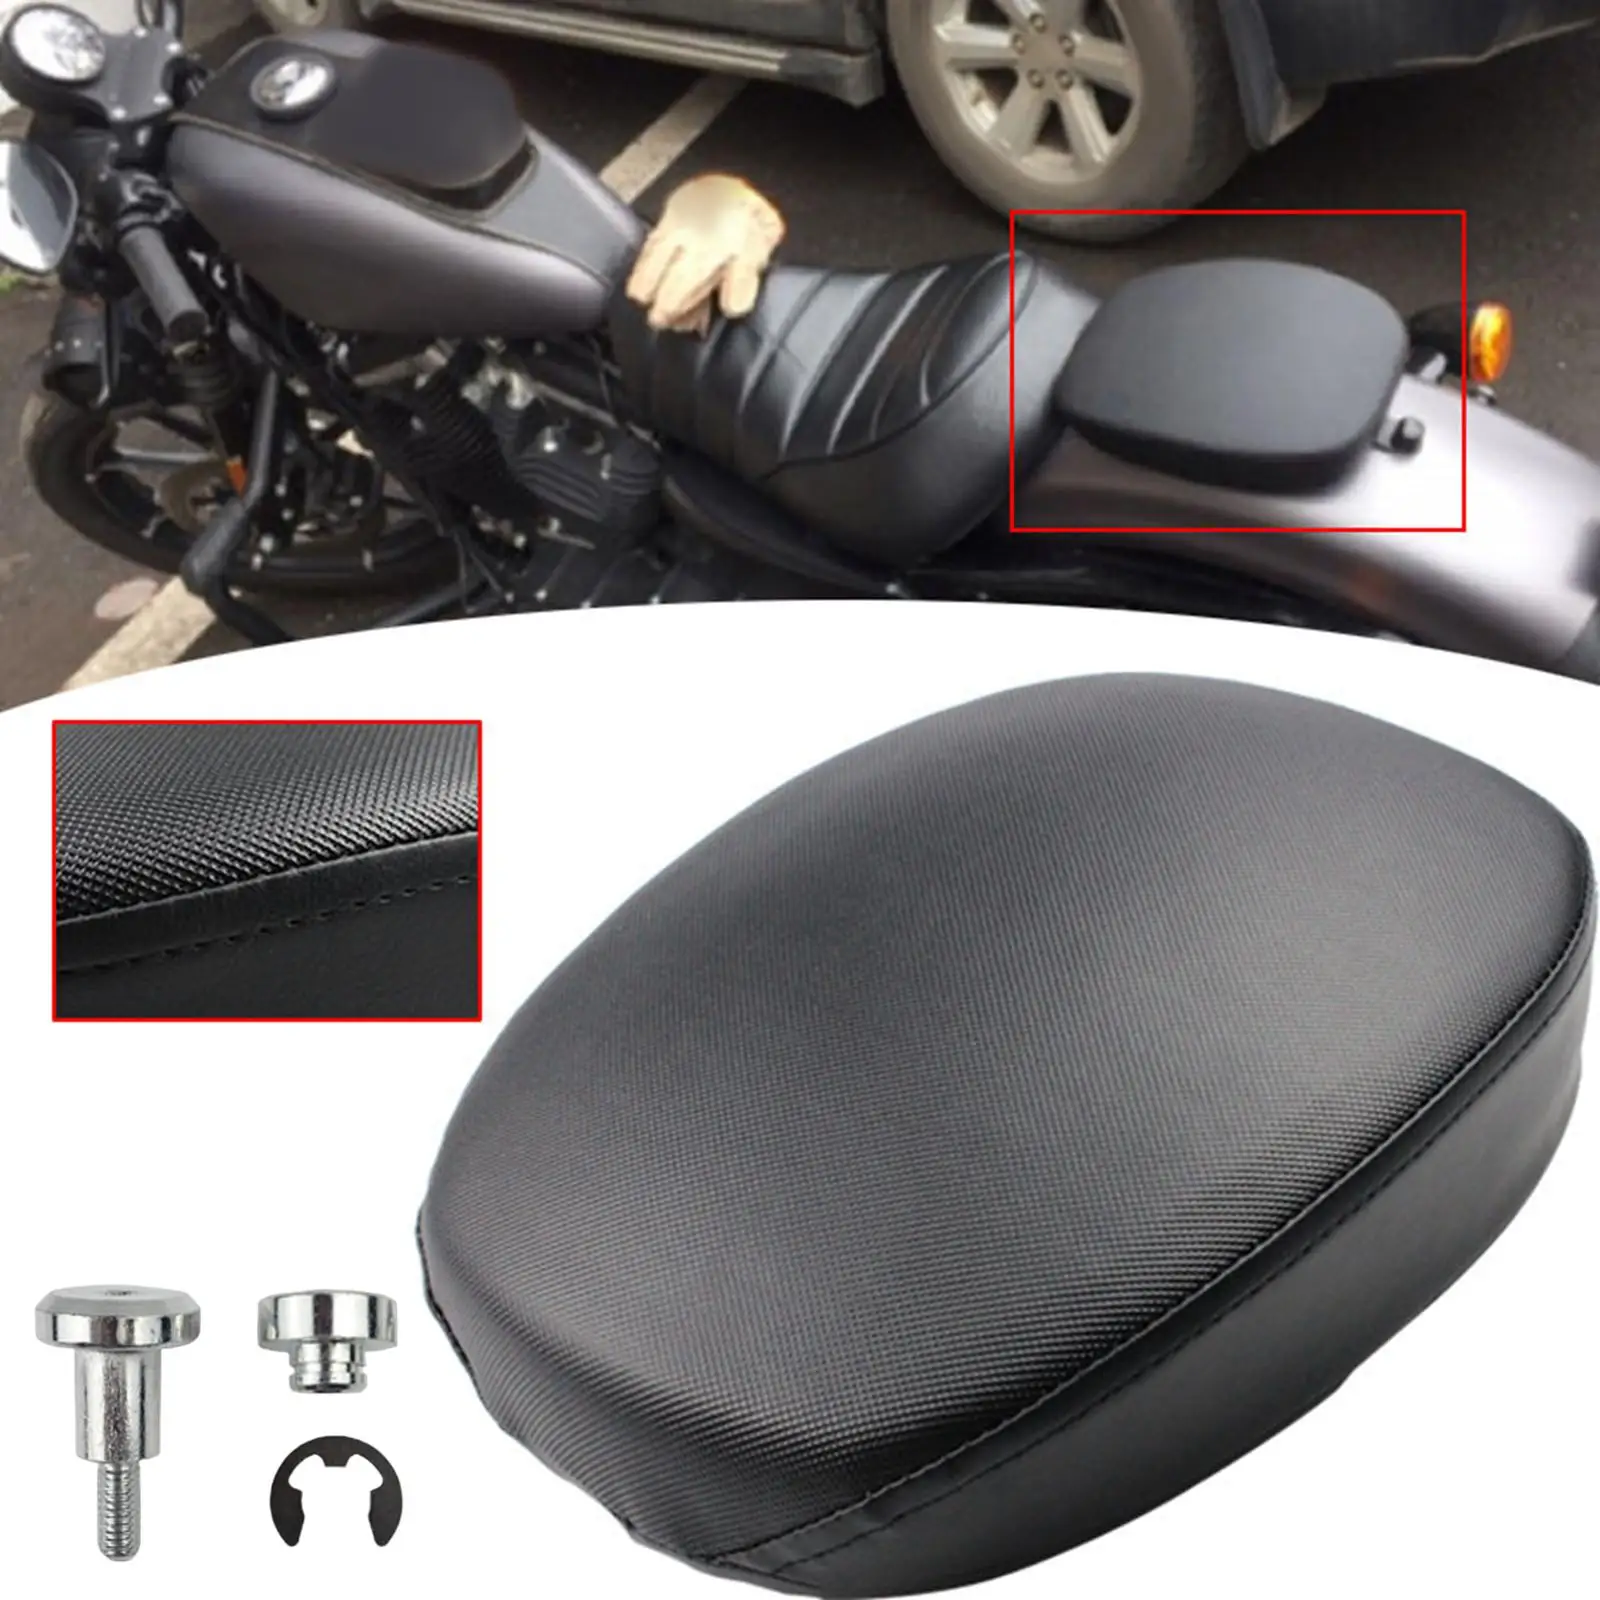 Motorcycle Rear Passenger Seat Pillion Pad PU Leather Waterproof Seat Cushion for 883 x48 1200 Accessory